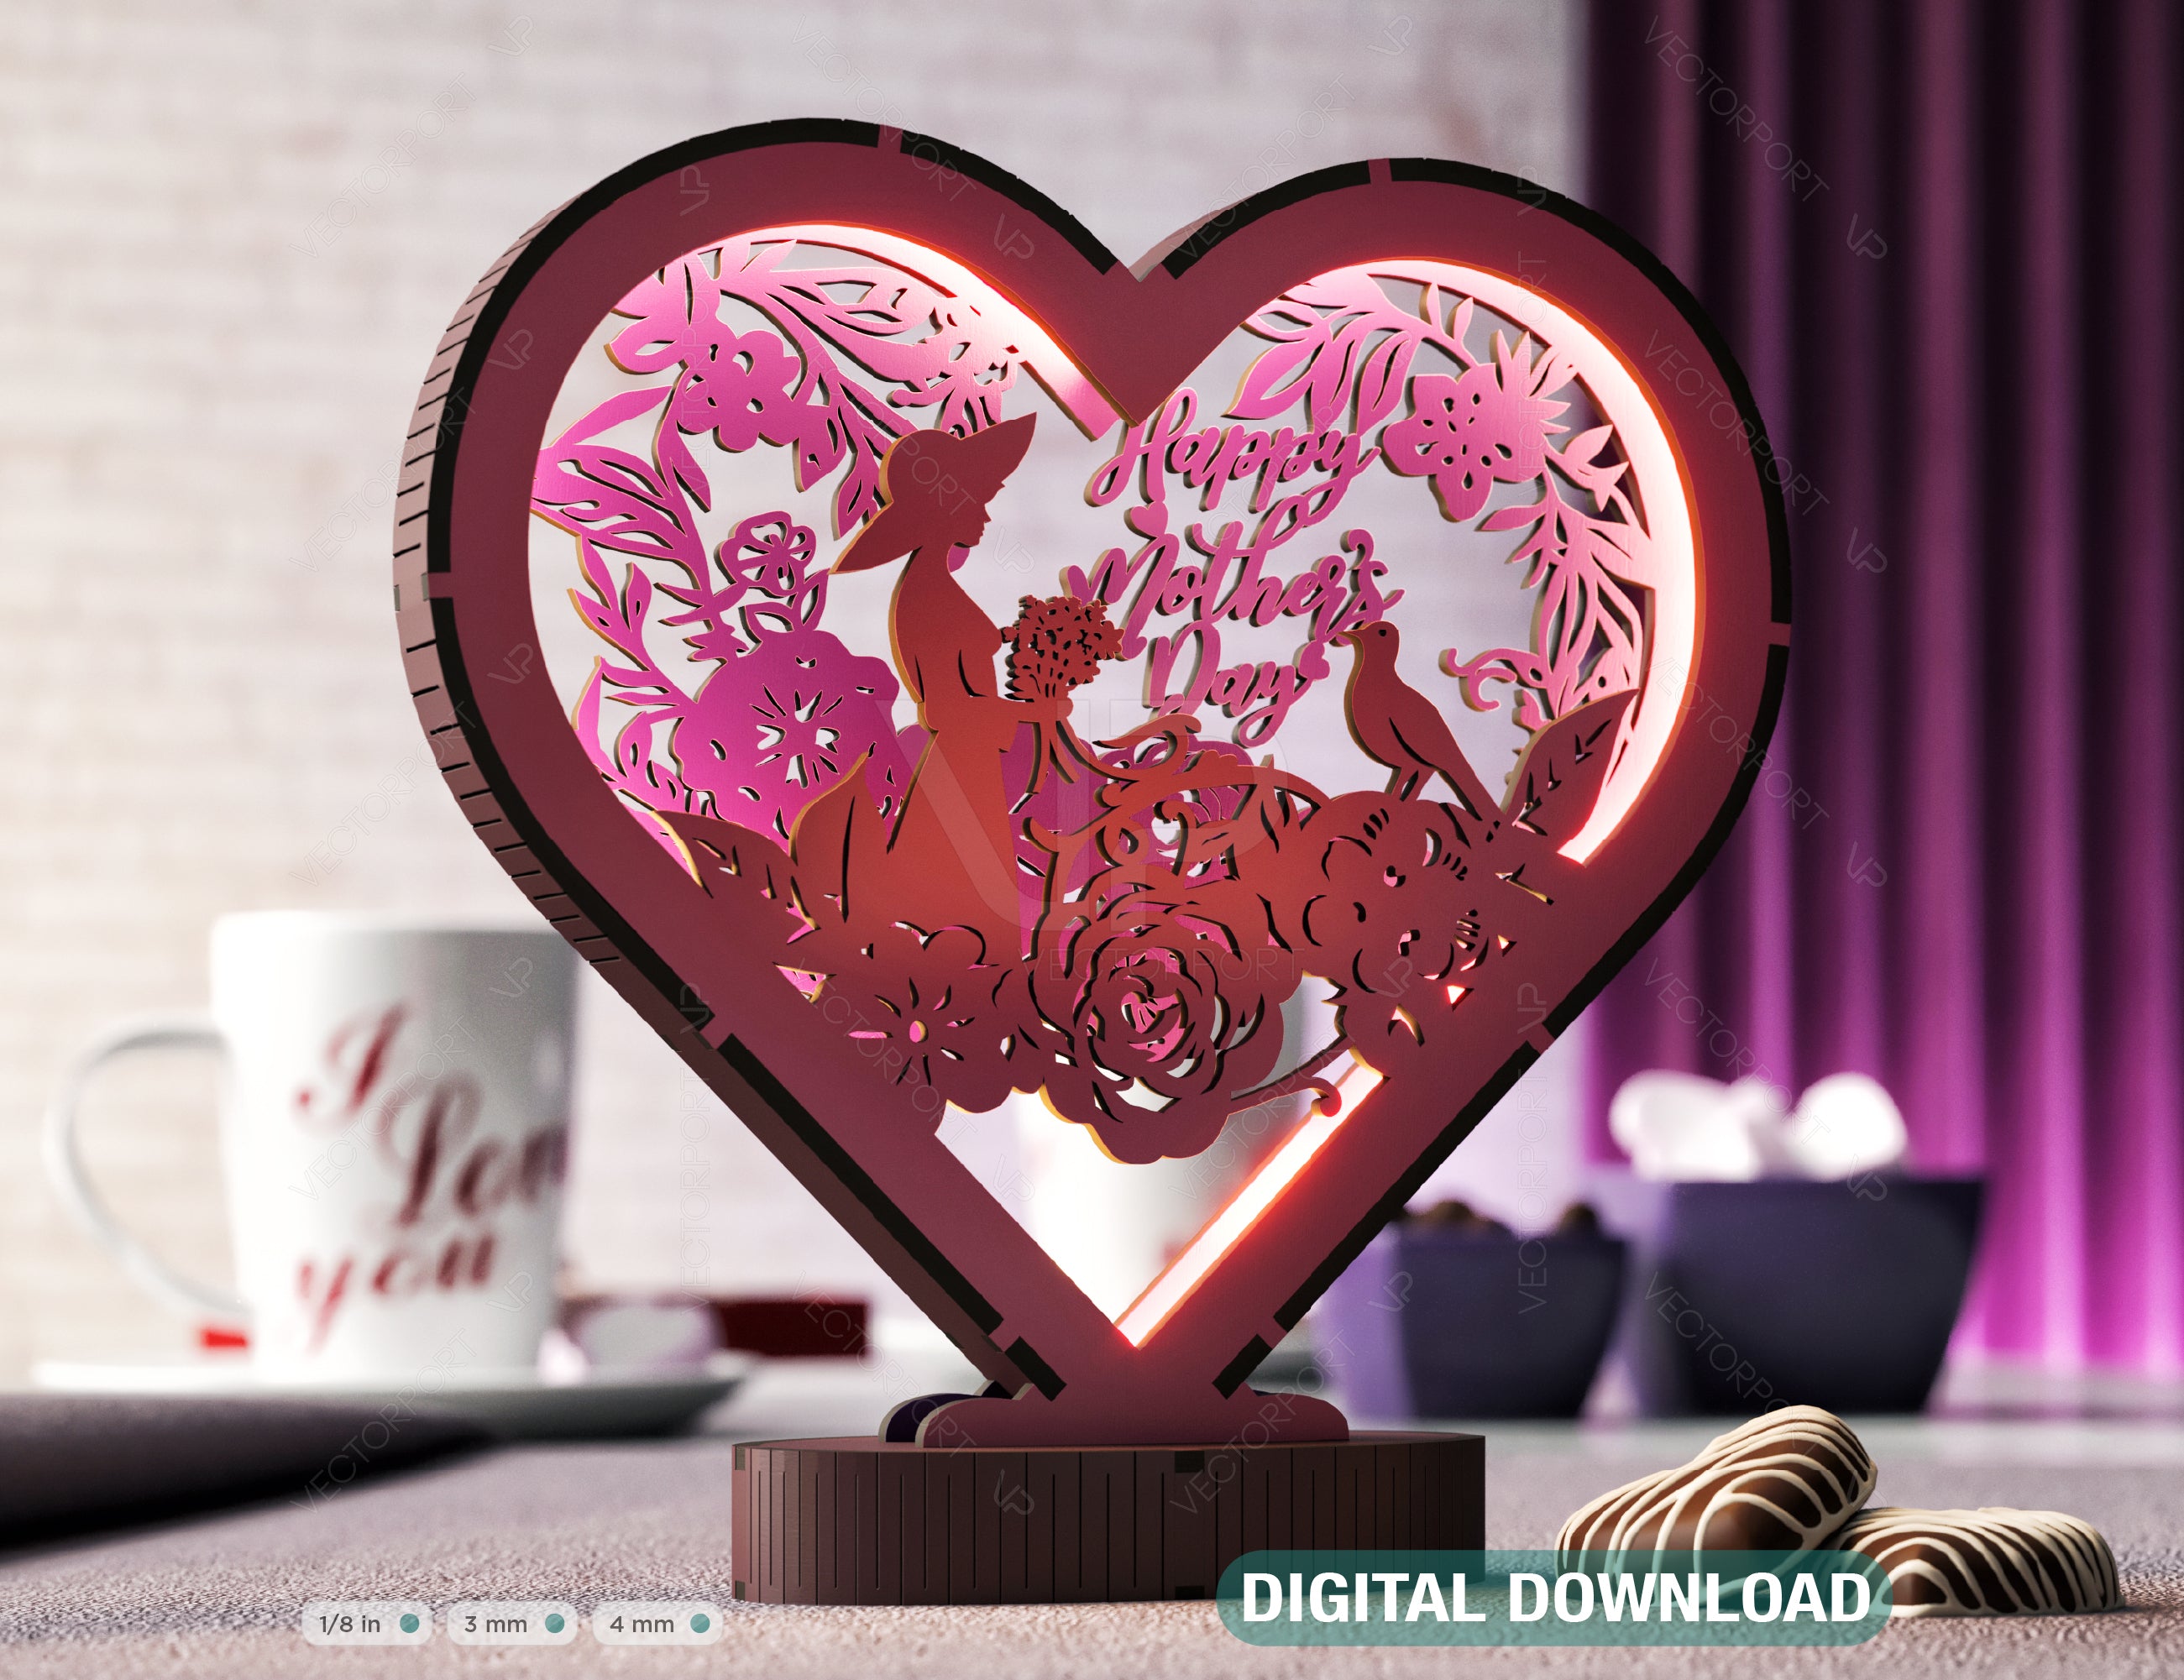 Harmony of Hearts: Artistic Table Lamp for Mother's Day 3D Led Light Laser Cut Night Lamp Heart shape Bedside Table Lamp Digital Download |#U371|